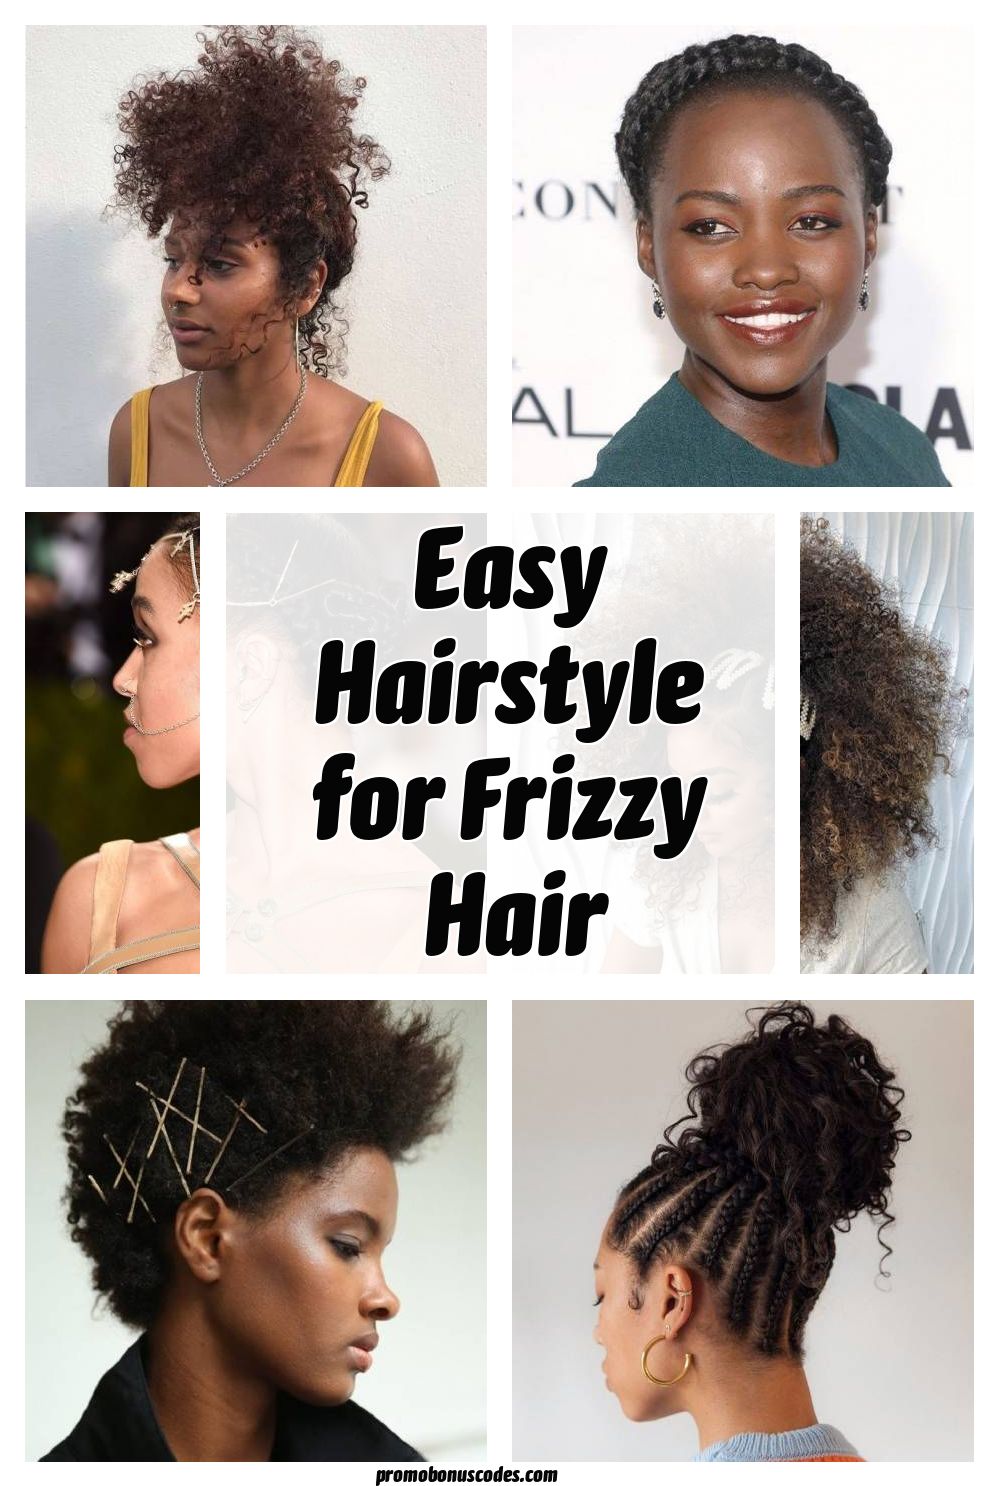 How To Style Curly Frizzy Hair  7 Easy Styling Tips And Hairstyles  Hair  Everyday Review